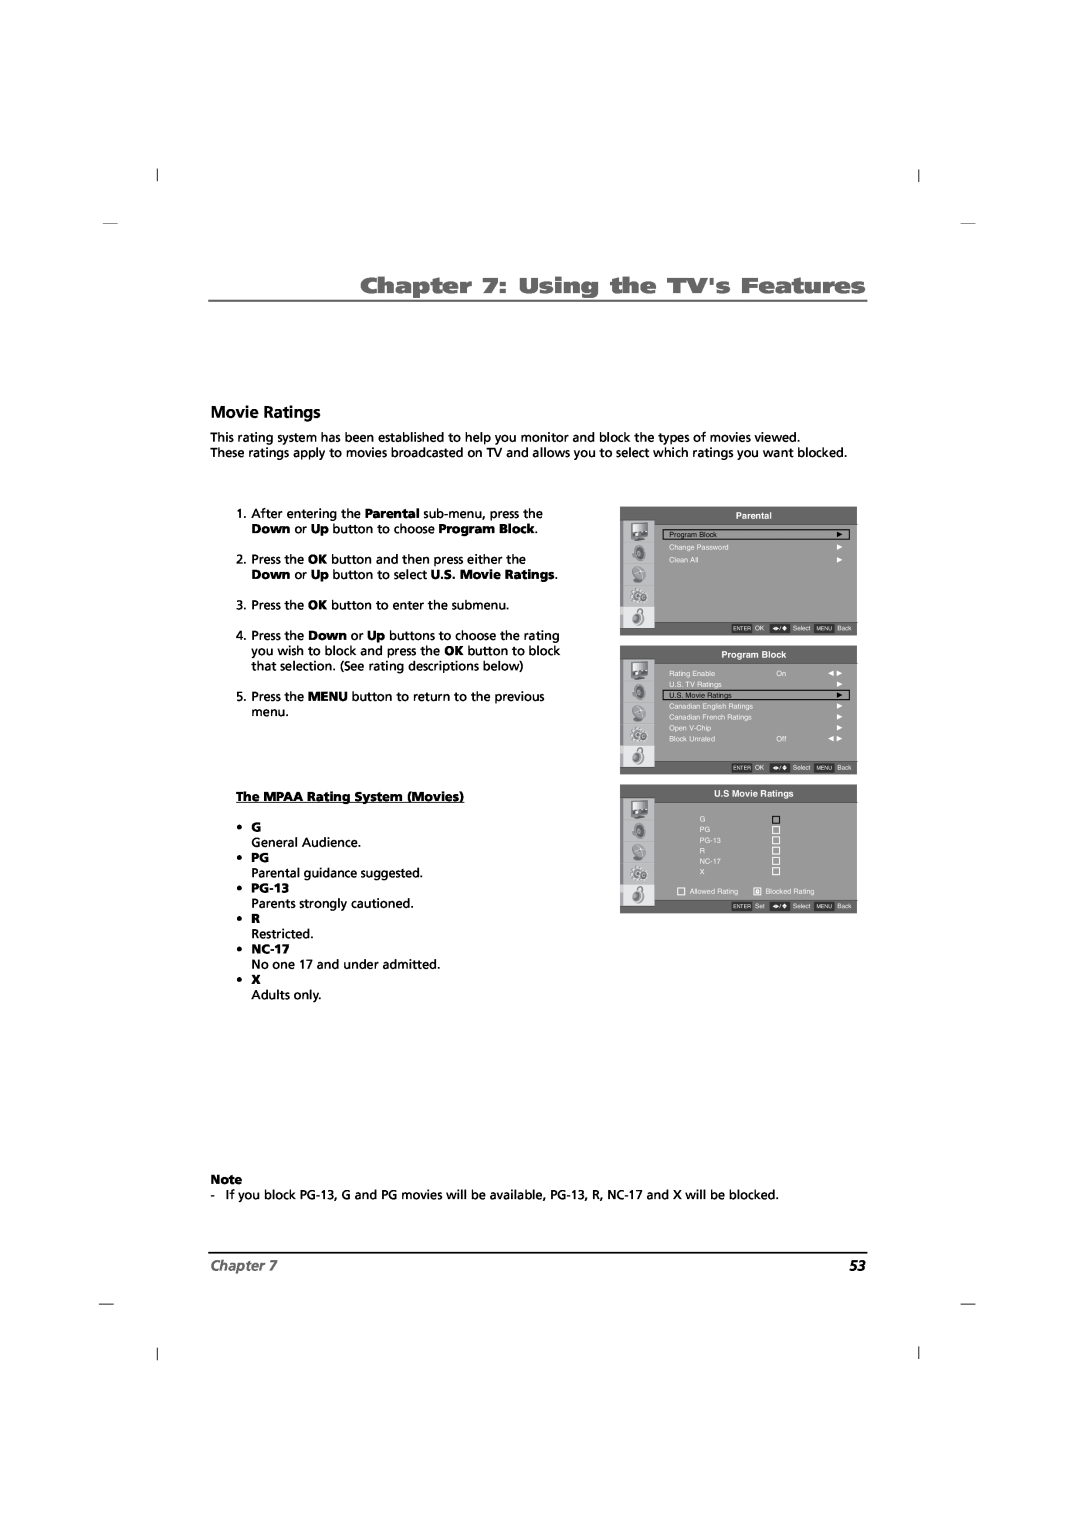 RCA J12H770 manual Movie Ratings, Using the TVs Features, Chapter 